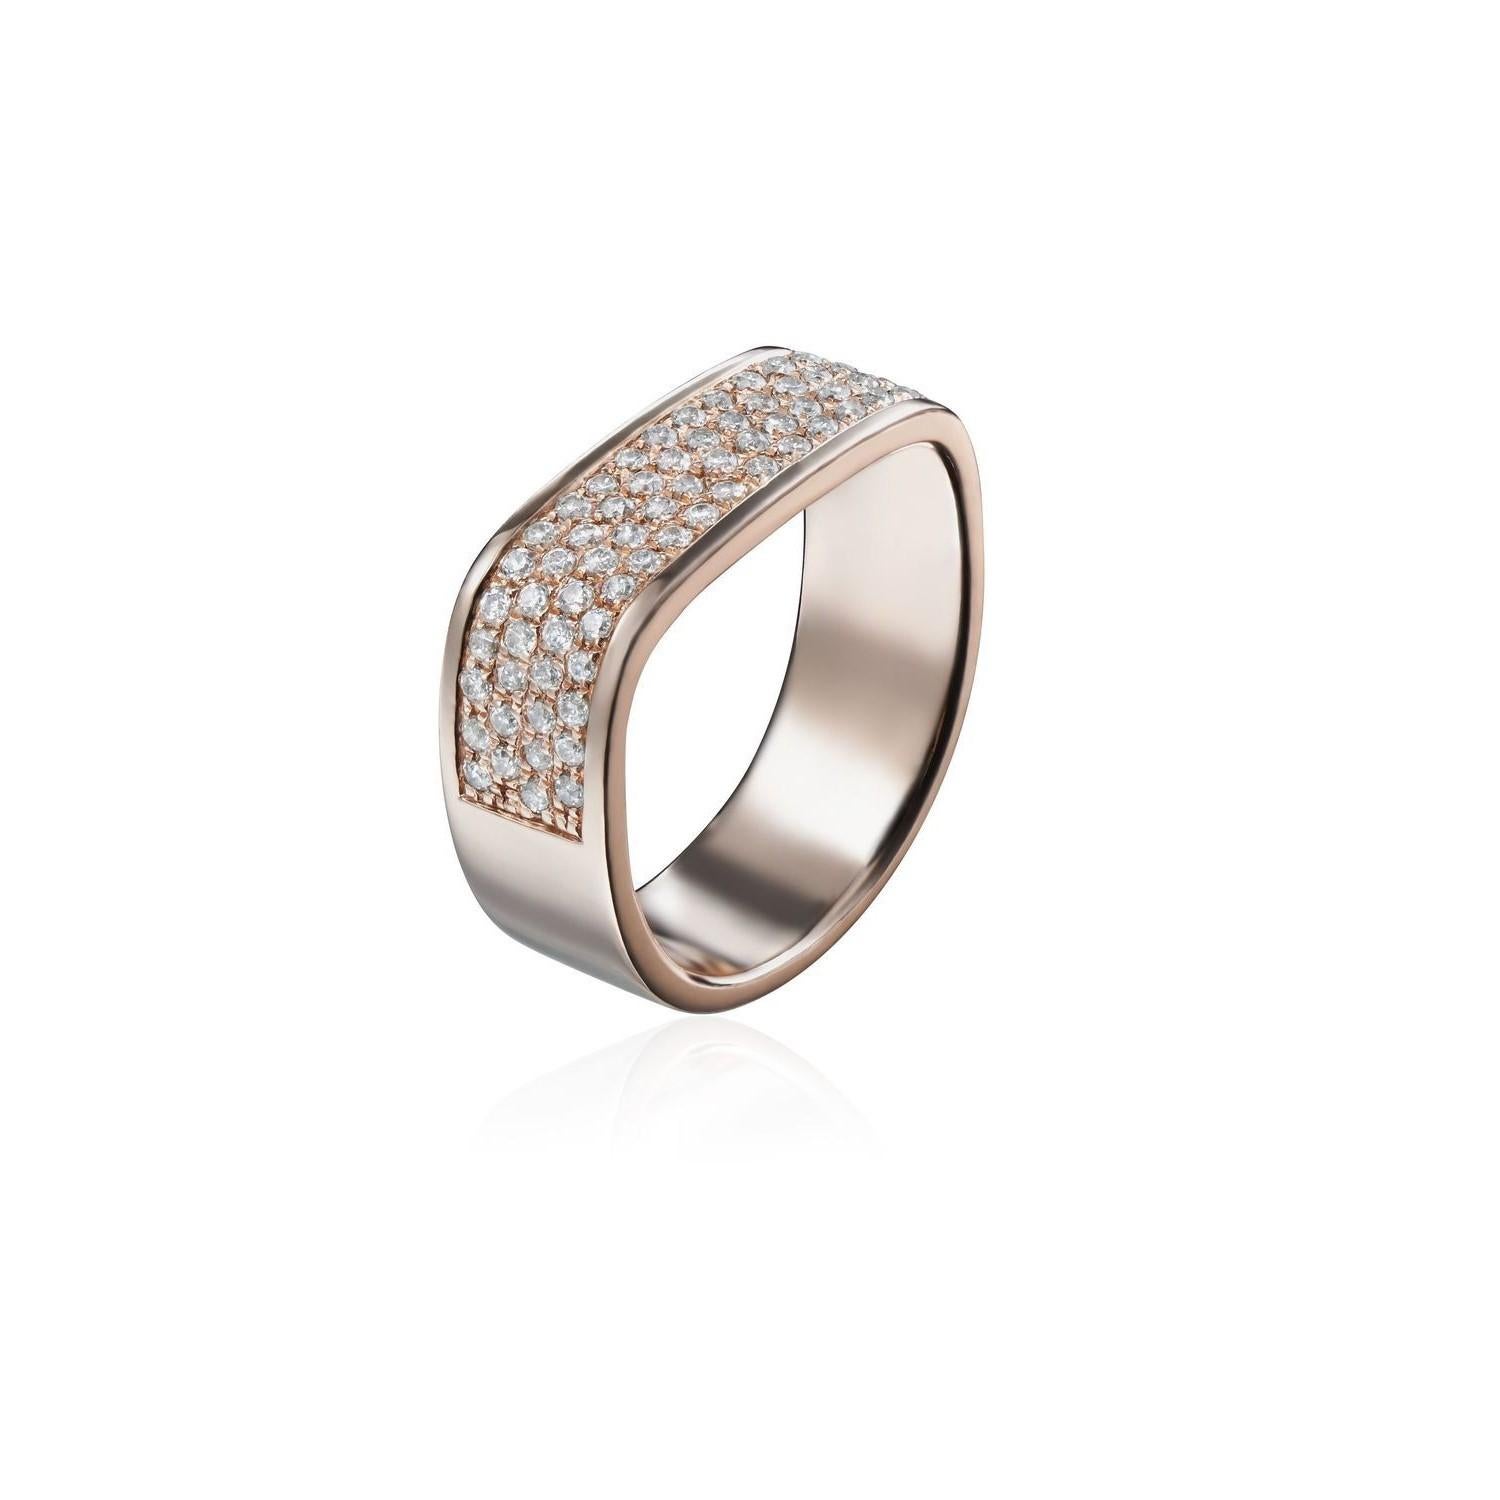 AS29
This statement 18kt rose gold Lana double diamond pinky ring from AS29 is simply striking. 
Total Carat Weight: 0.4 cts.

